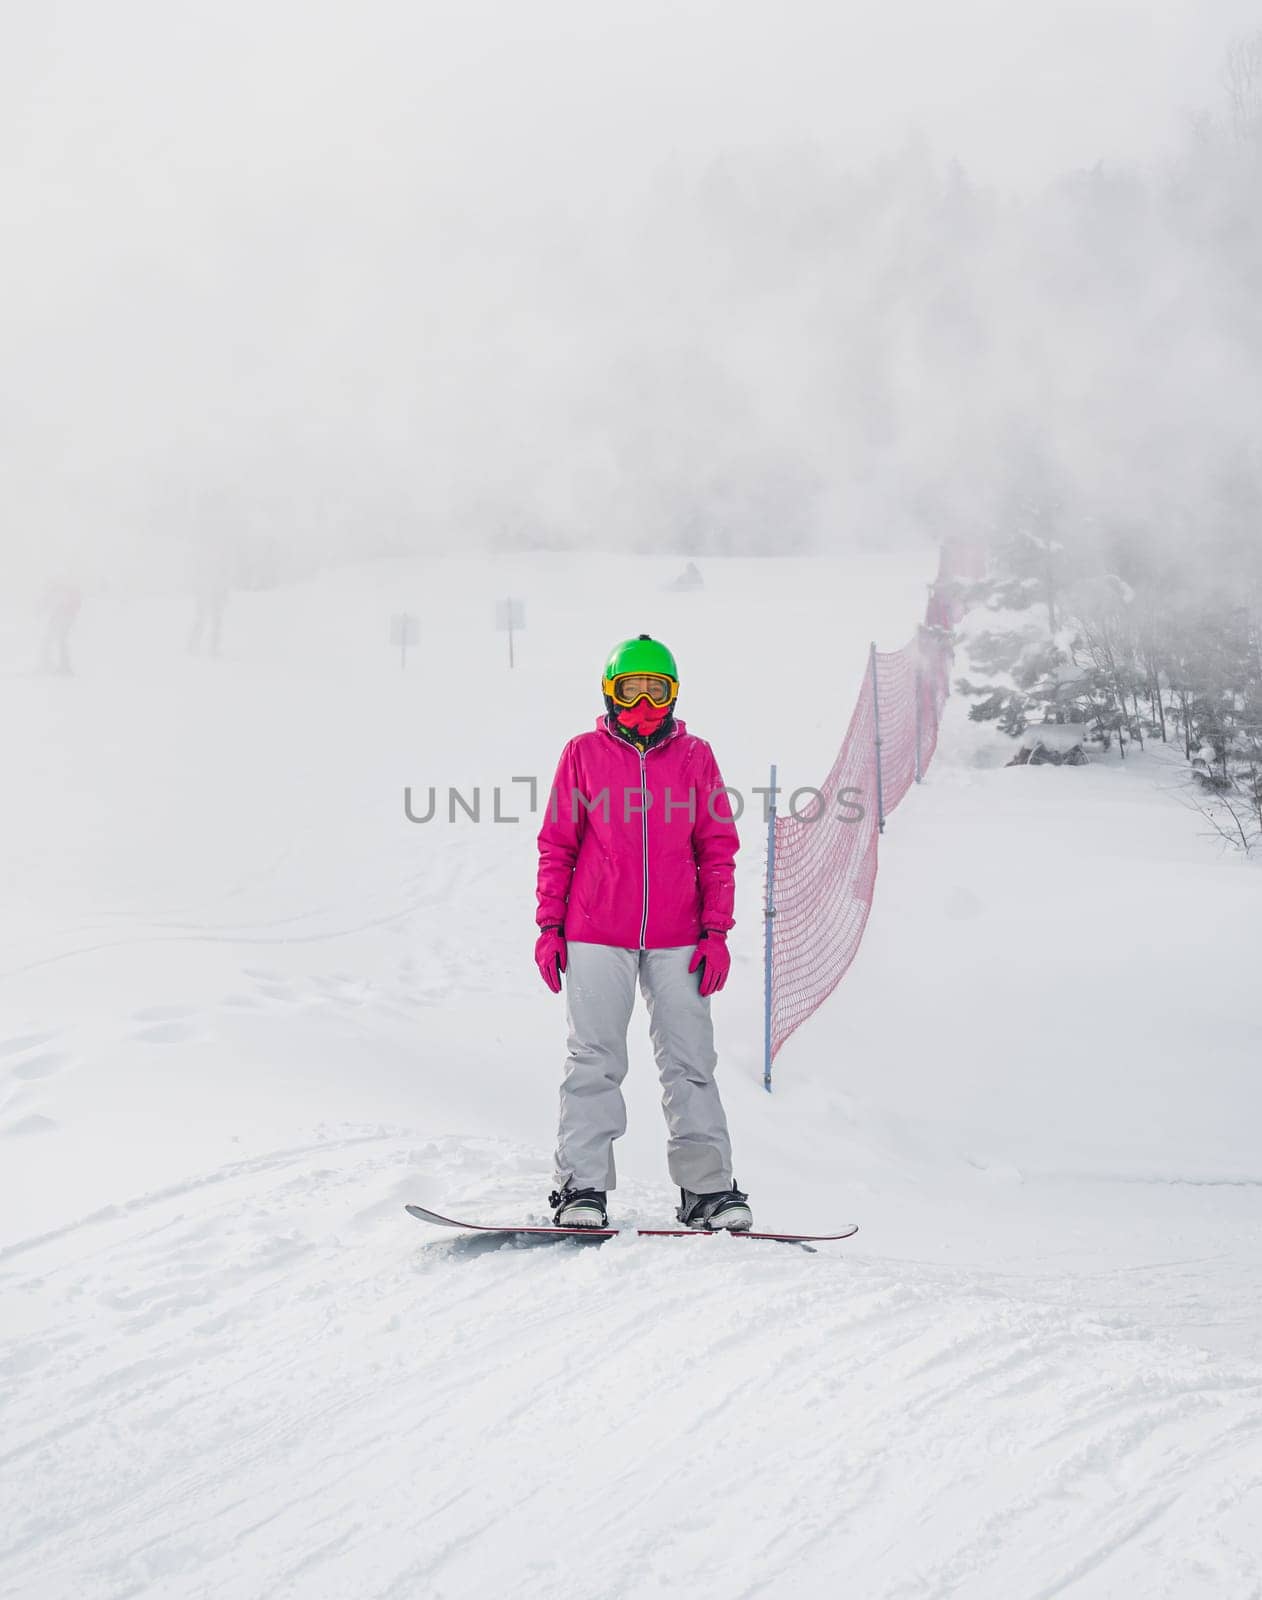 A snowboarder wearing a bright pink jacket and green helmet stands on a misty, snow-covered slope. The scene is set in a winter landscape with some trees and a safety net in the background.